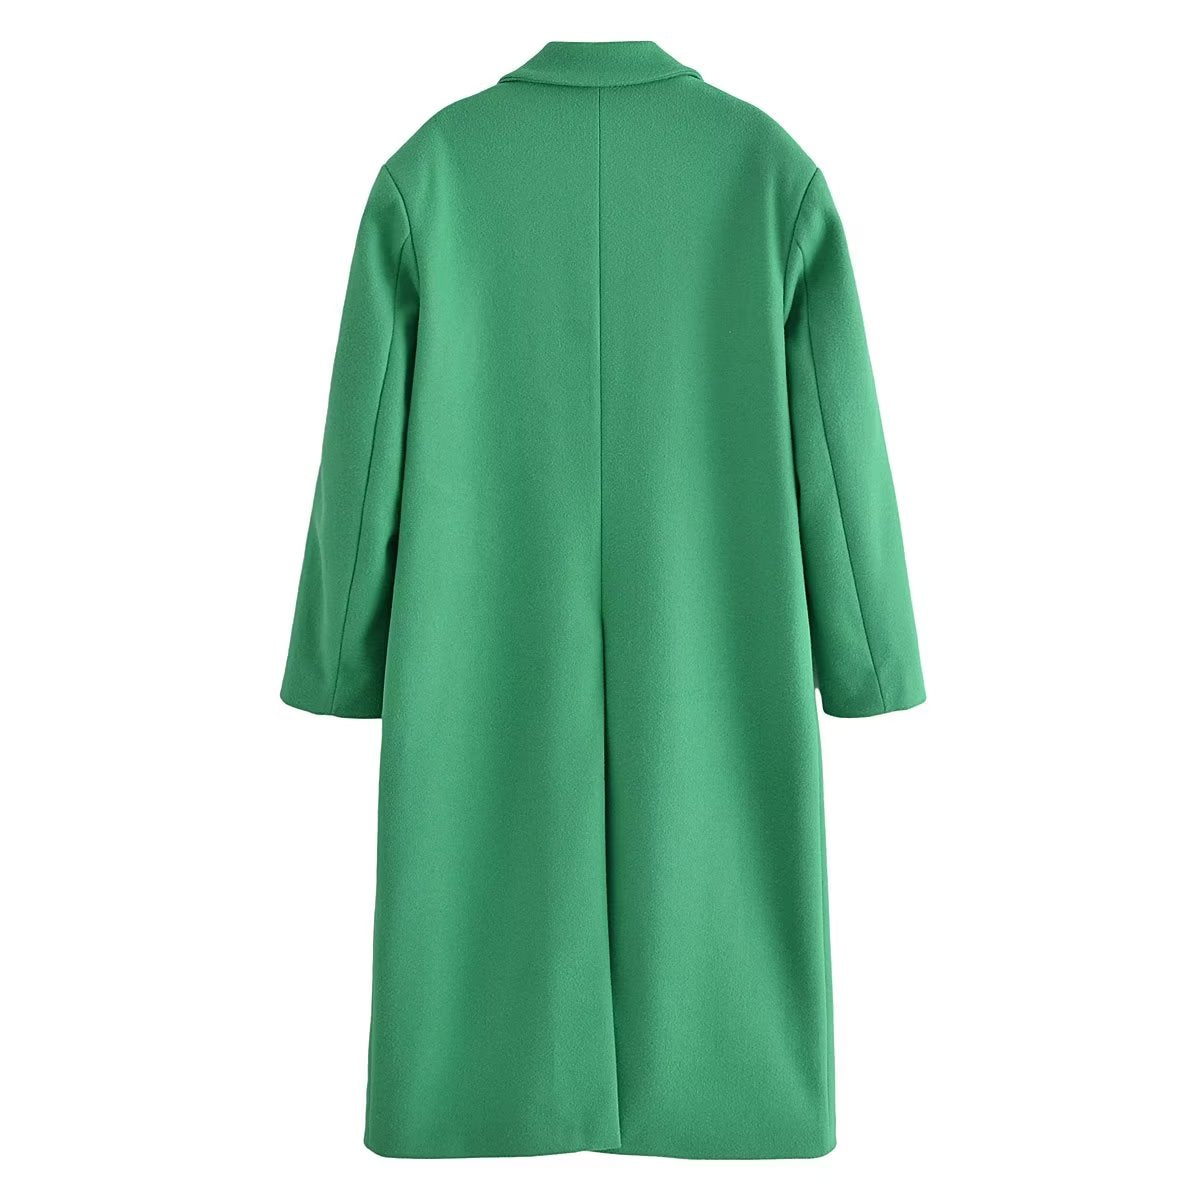 Women Clothing Mid Length Green Double Breasted Long Sleeve Woolen Coat Outerwear